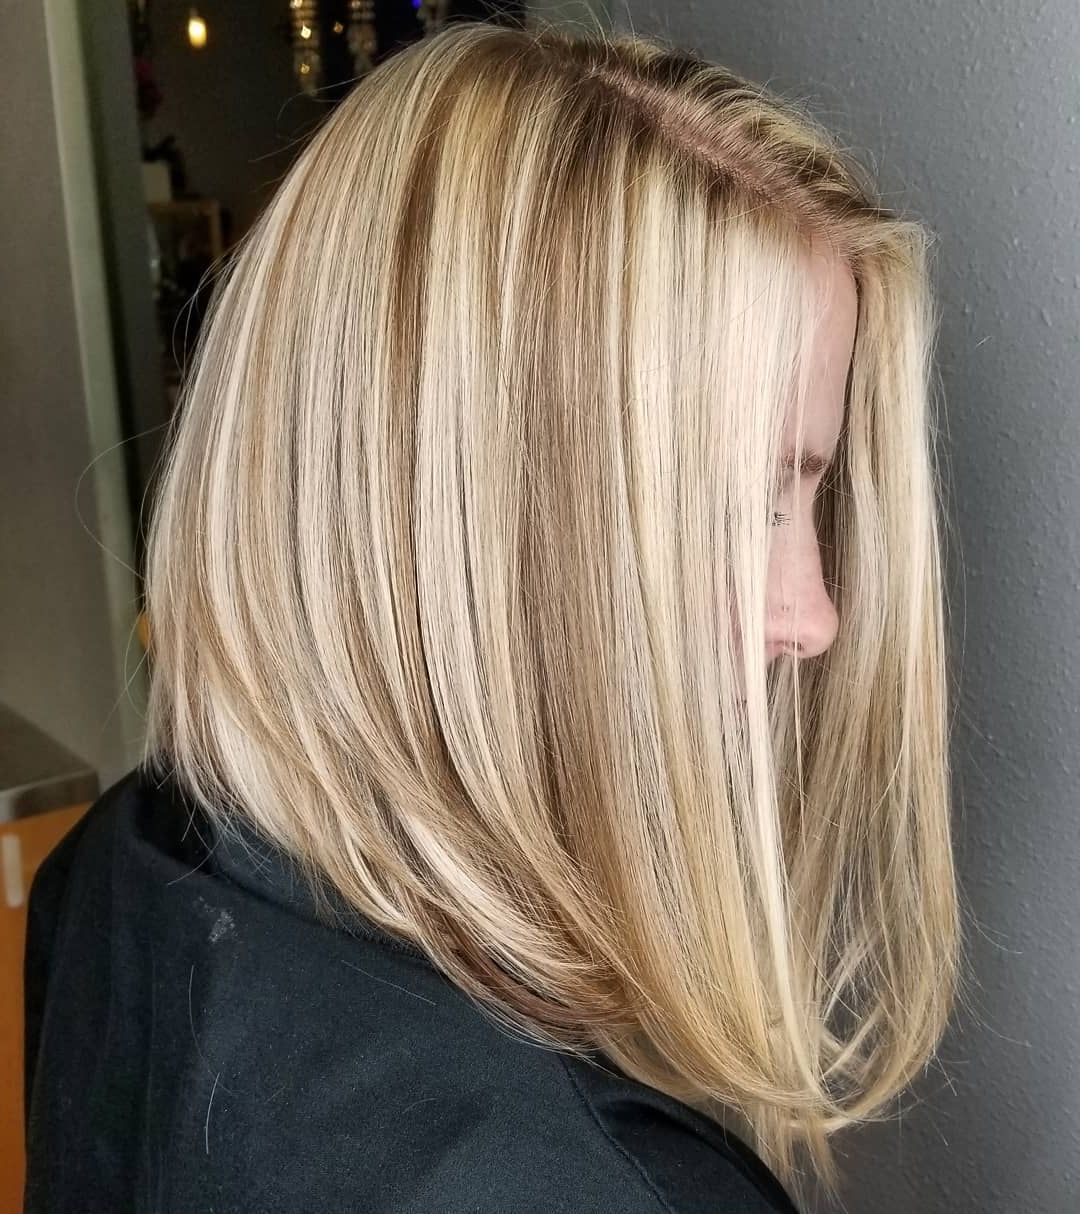 How To Nail Layered Hair In 2019: Full Guide To Lengths And Regarding 2017 Shag Haircuts With Blunt Ends And Angled Layers (View 3 of 20)